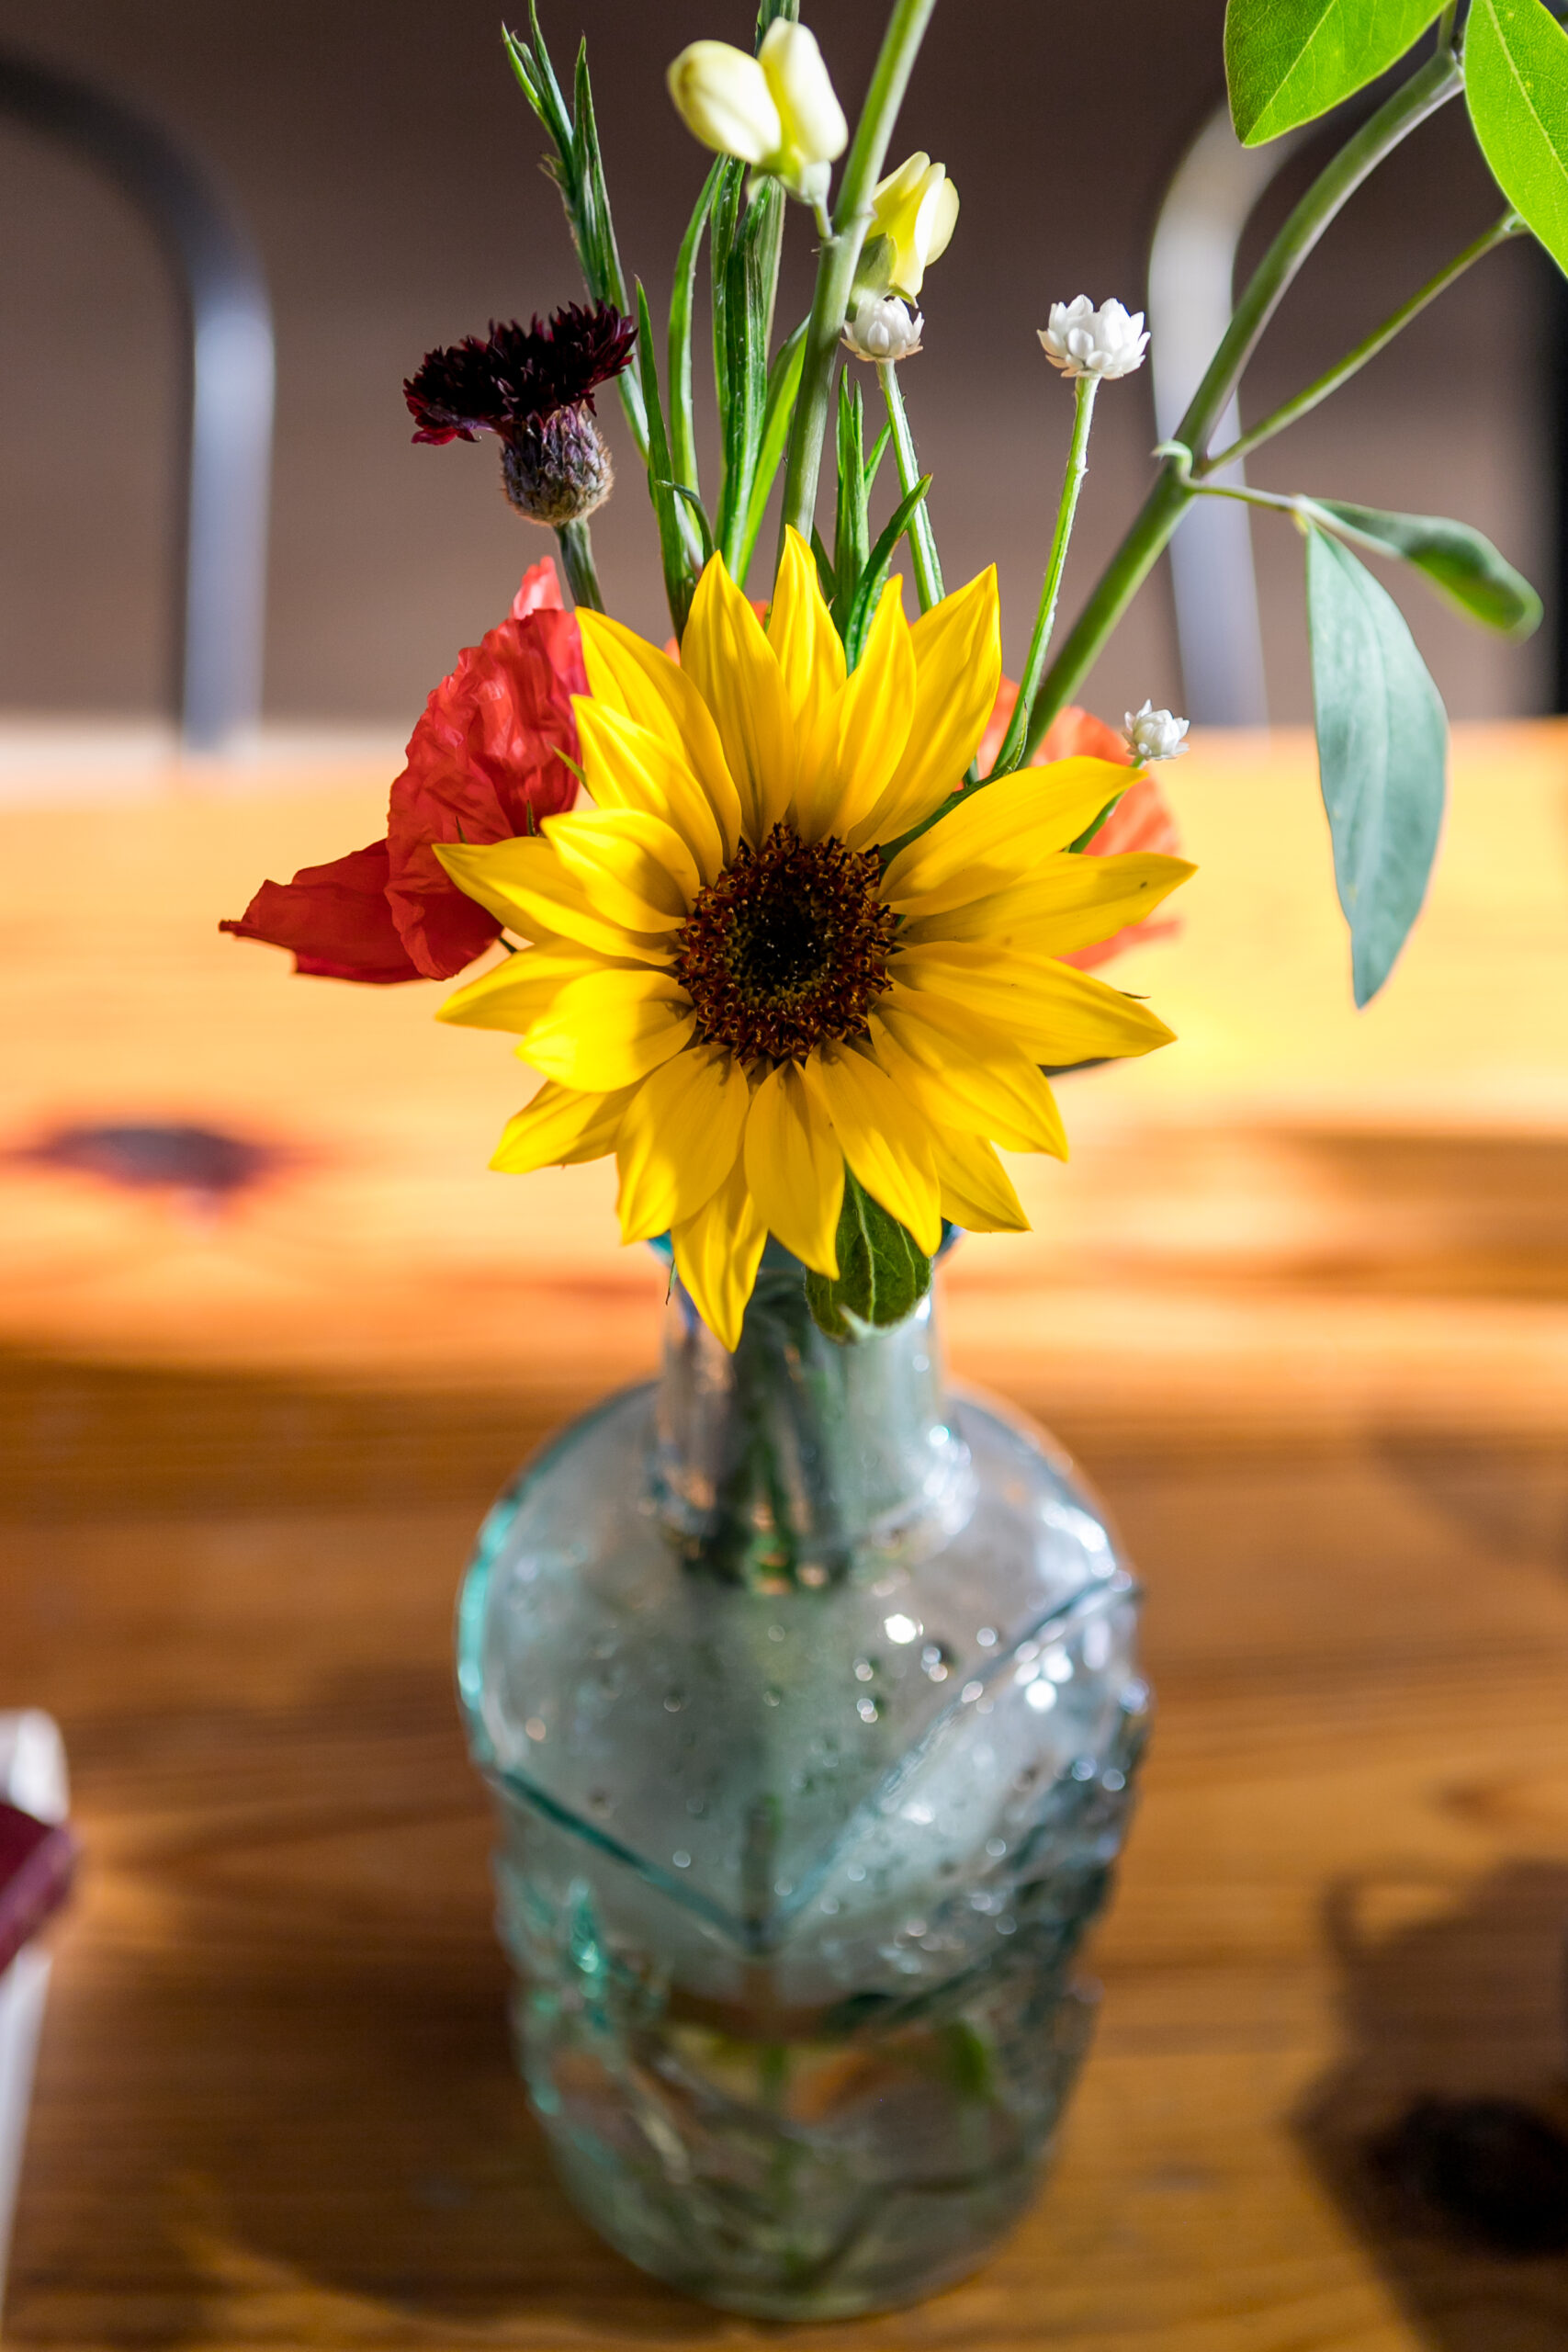 closeup on a bud vase with colorful blooms, including a sunflower.